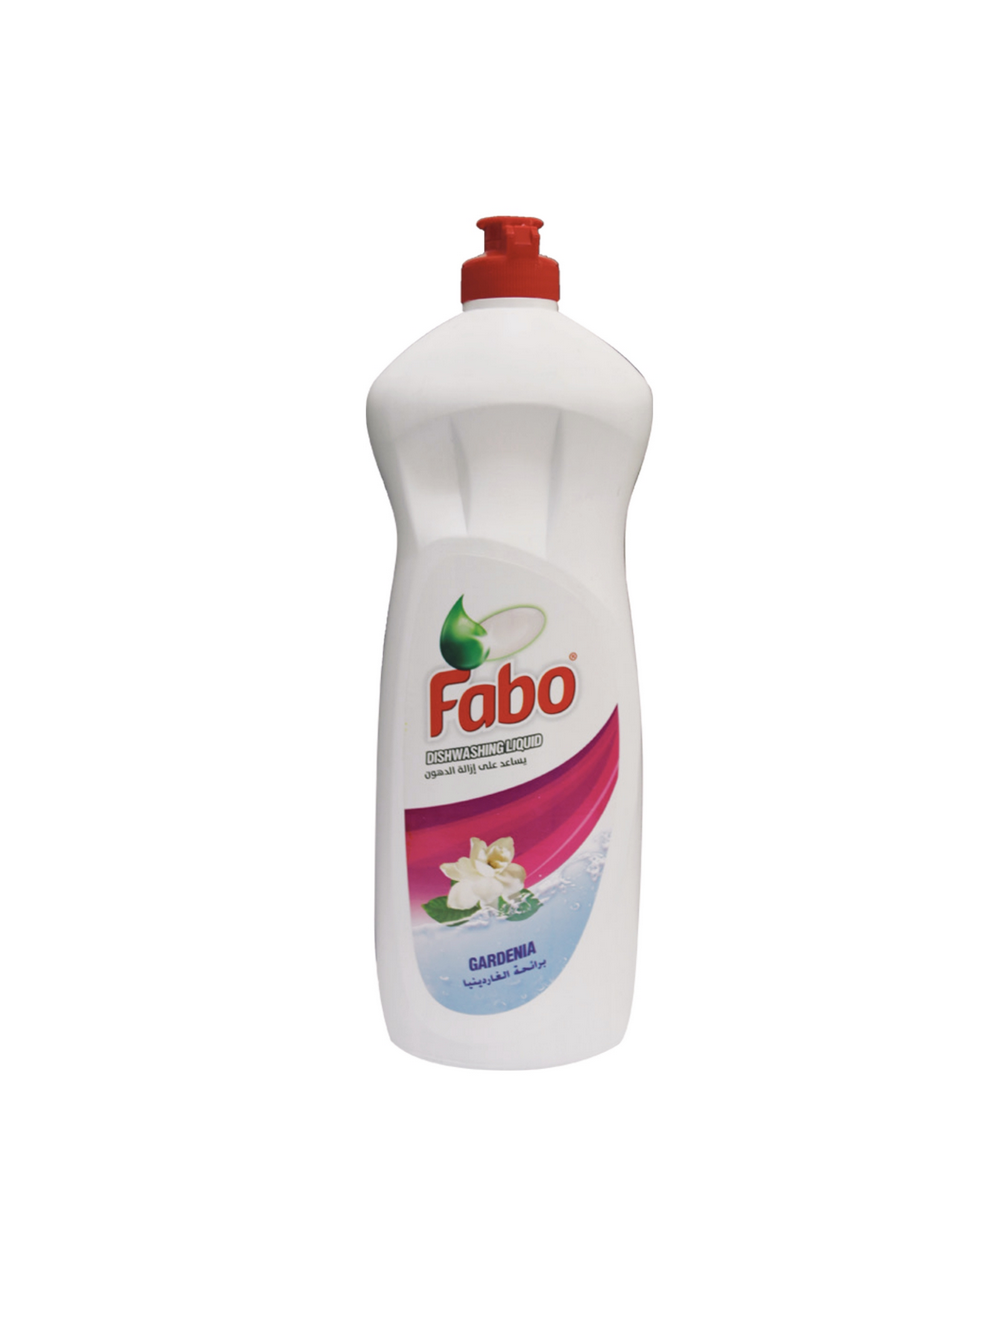 fabo-products_page-0019